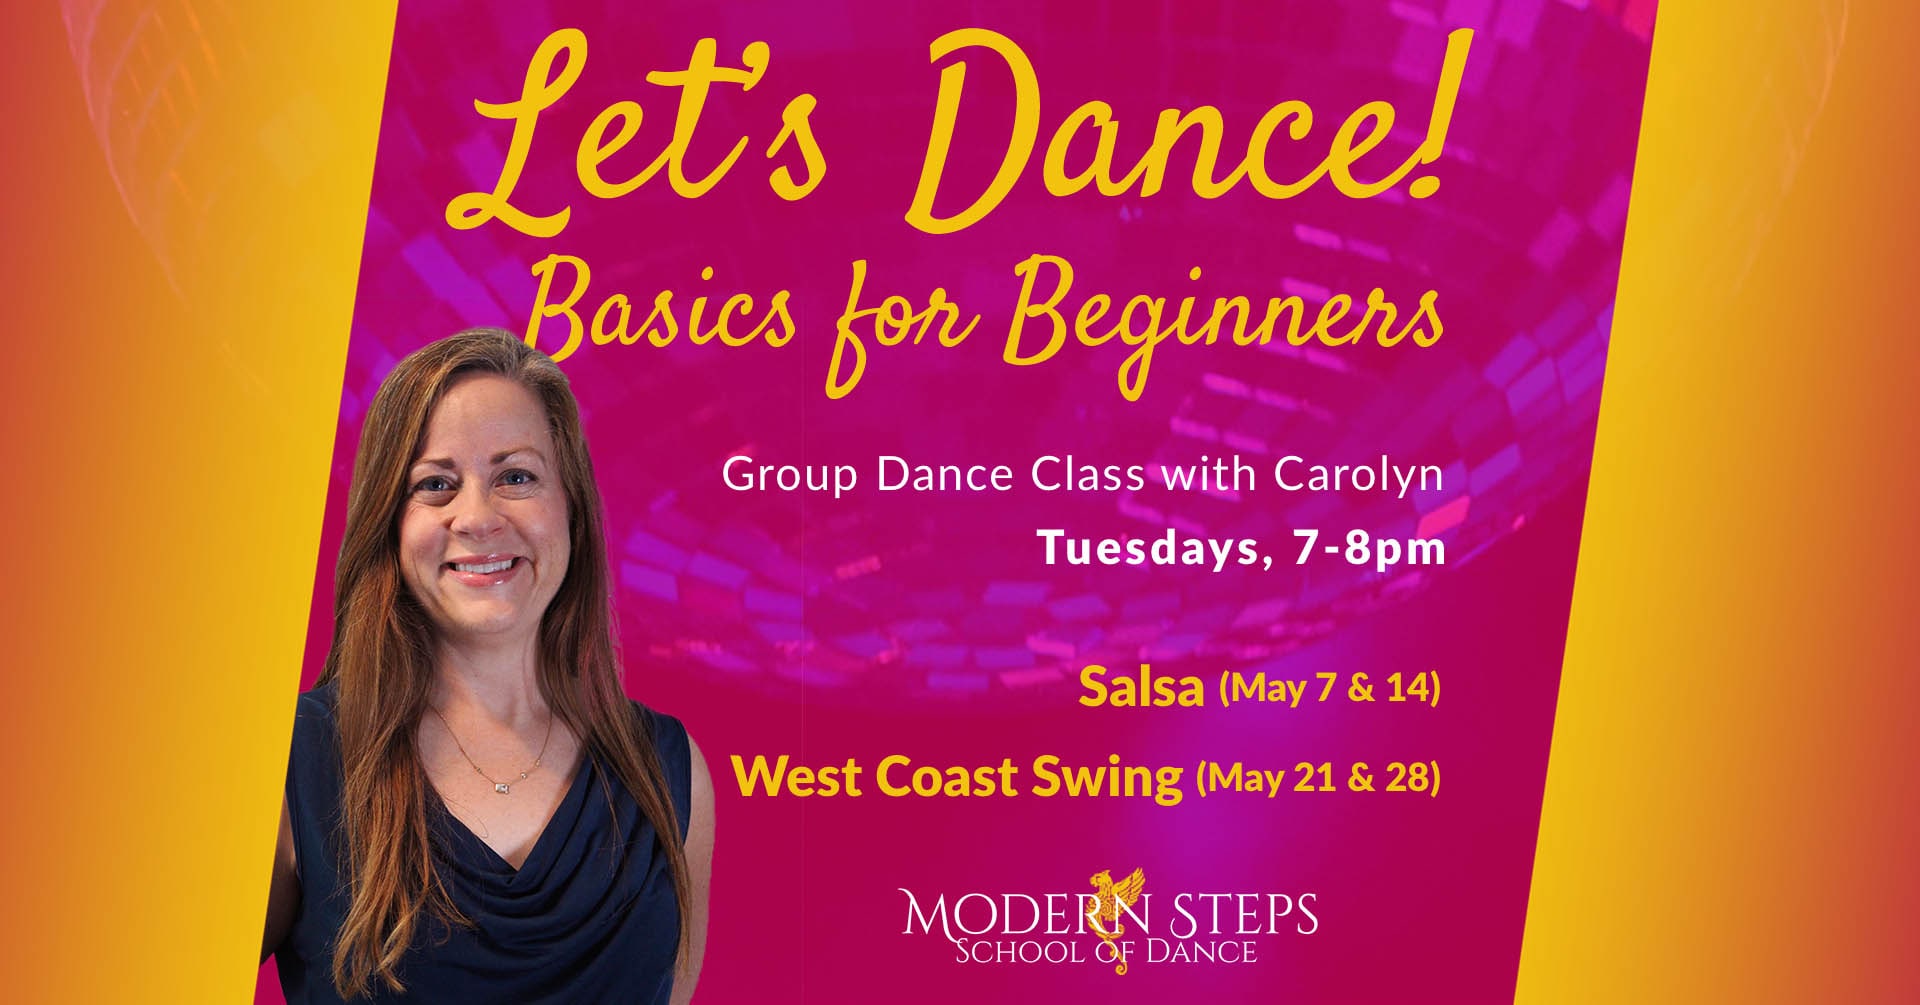 Modern Steps School of Dance Naples Florida Dance Classes - Group Ballroom Dance Lessons - Naples Florida Things to Do -- Let's Dance! Basics for Beginners with Carolyn Bivens: Salsa & West Coast Swing